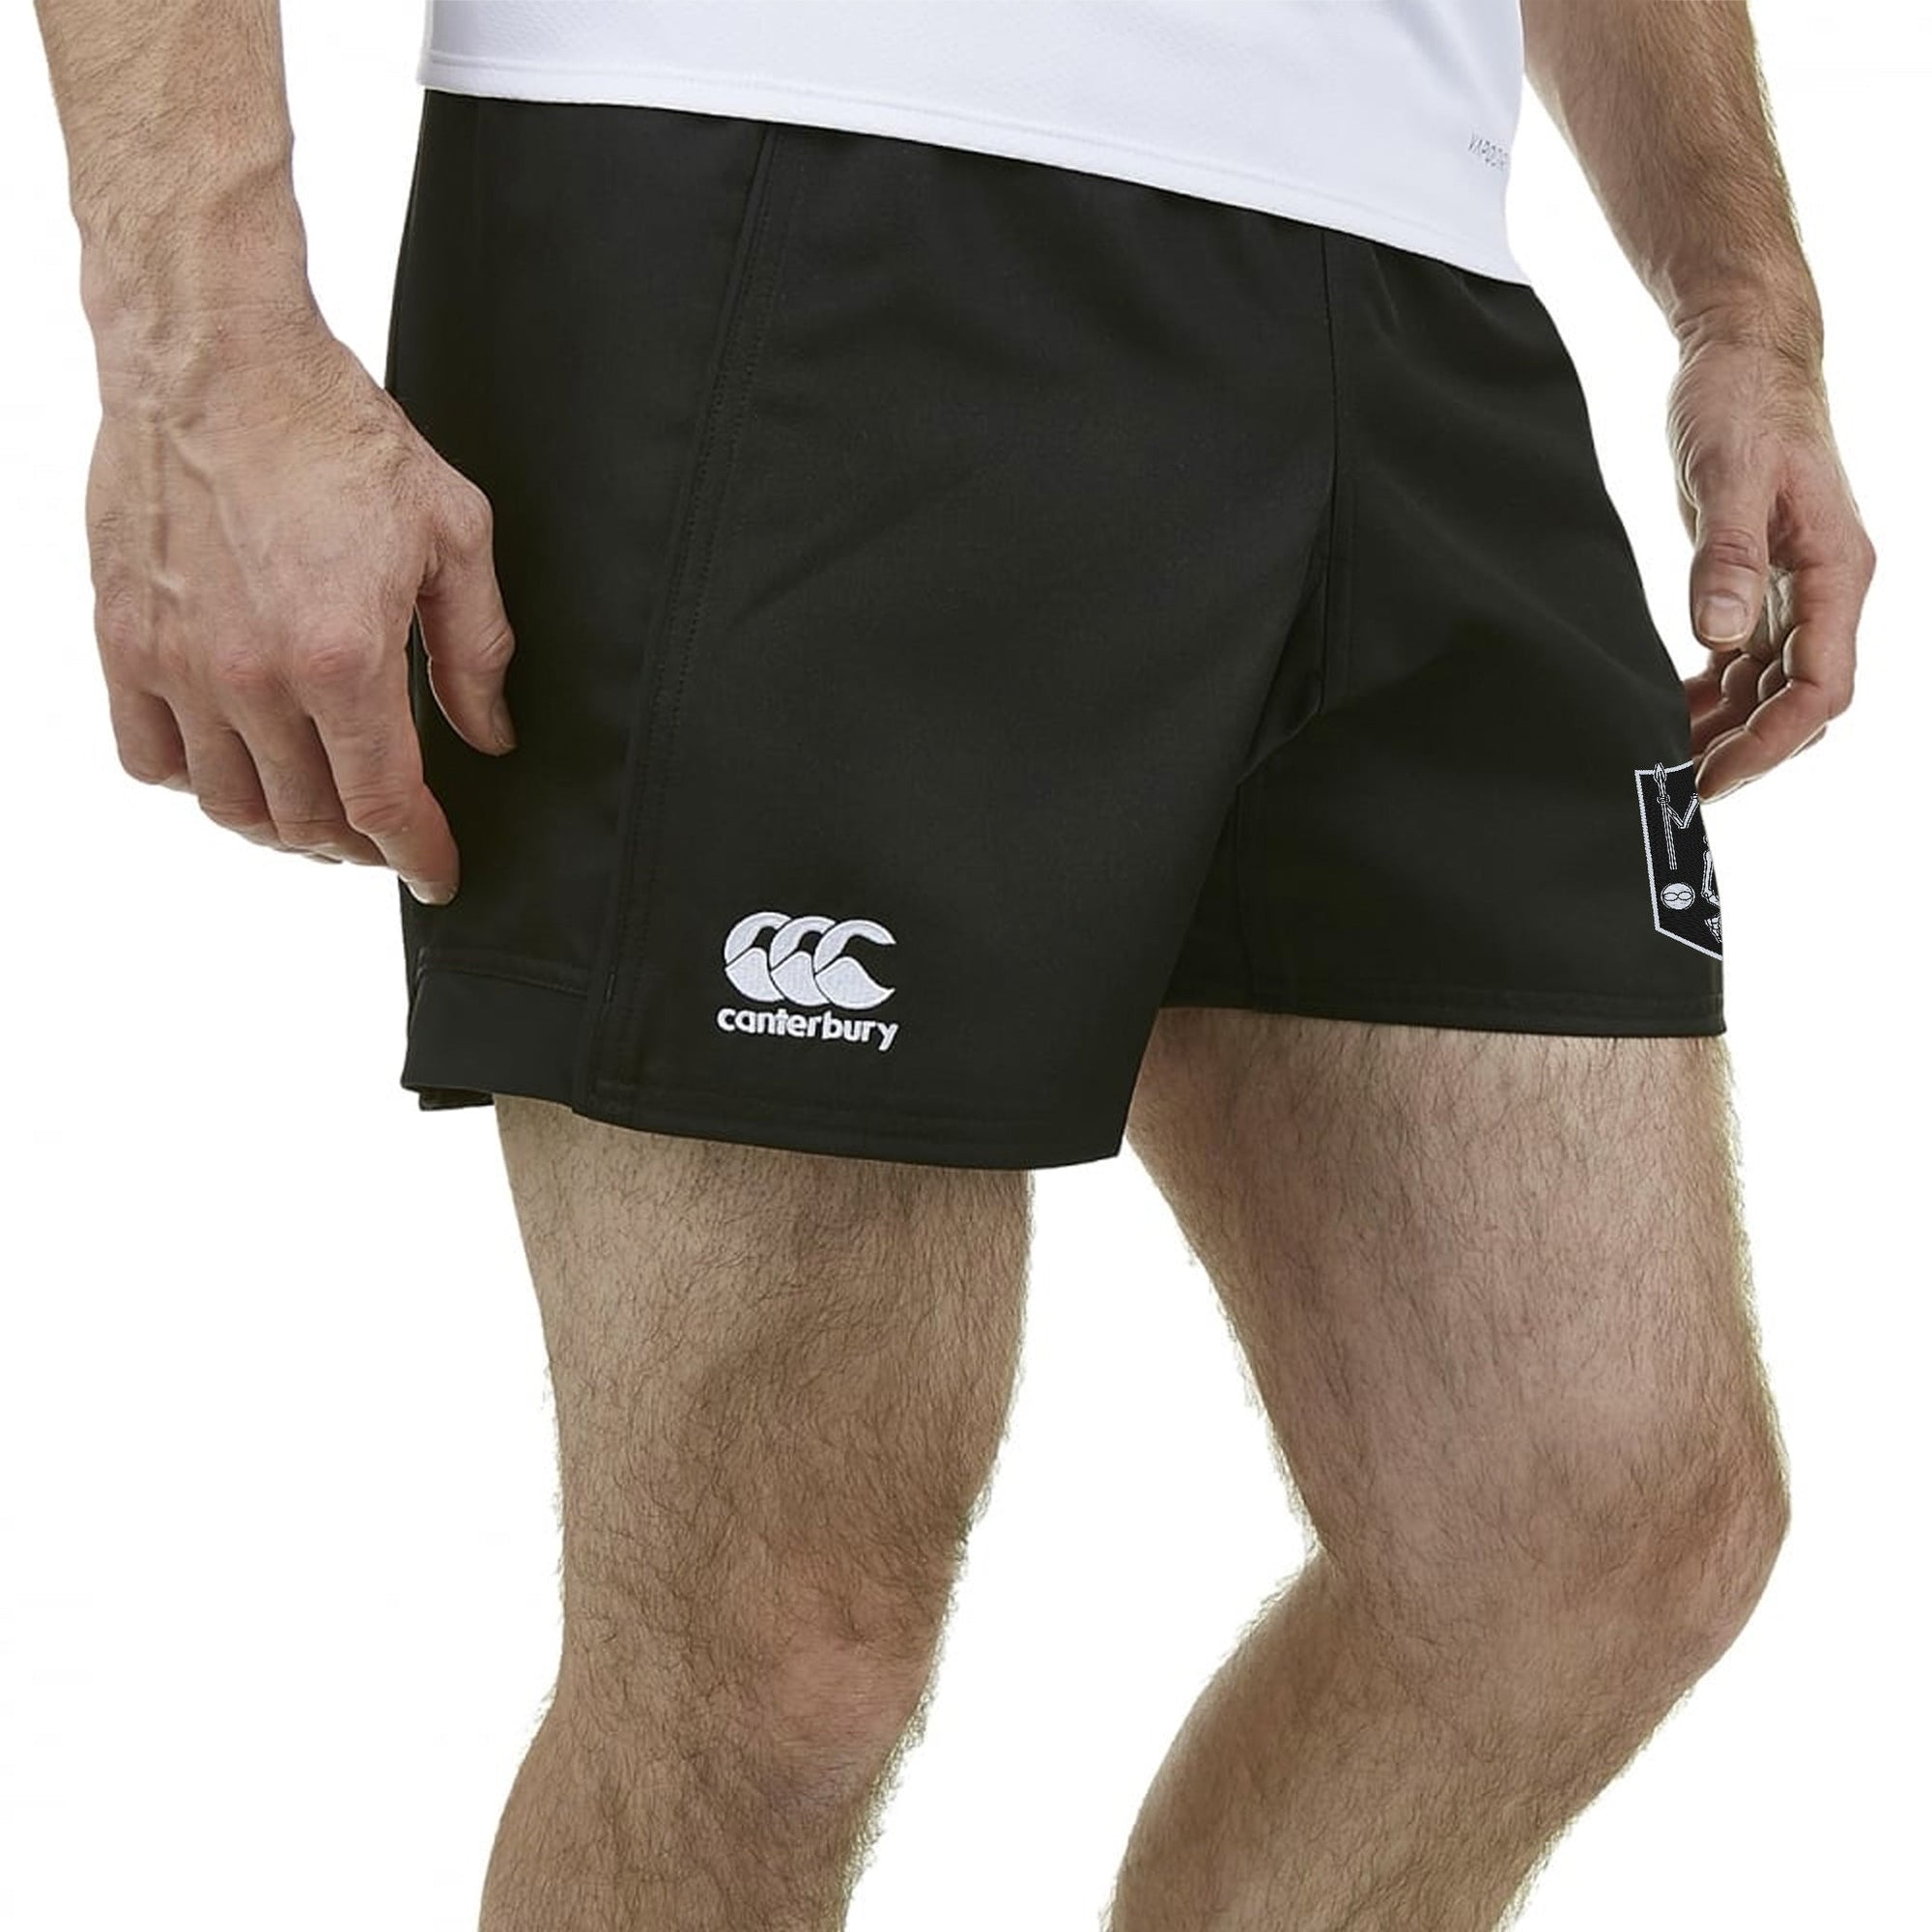 Rugby Imports Purple Haze Rugby Advantage Short